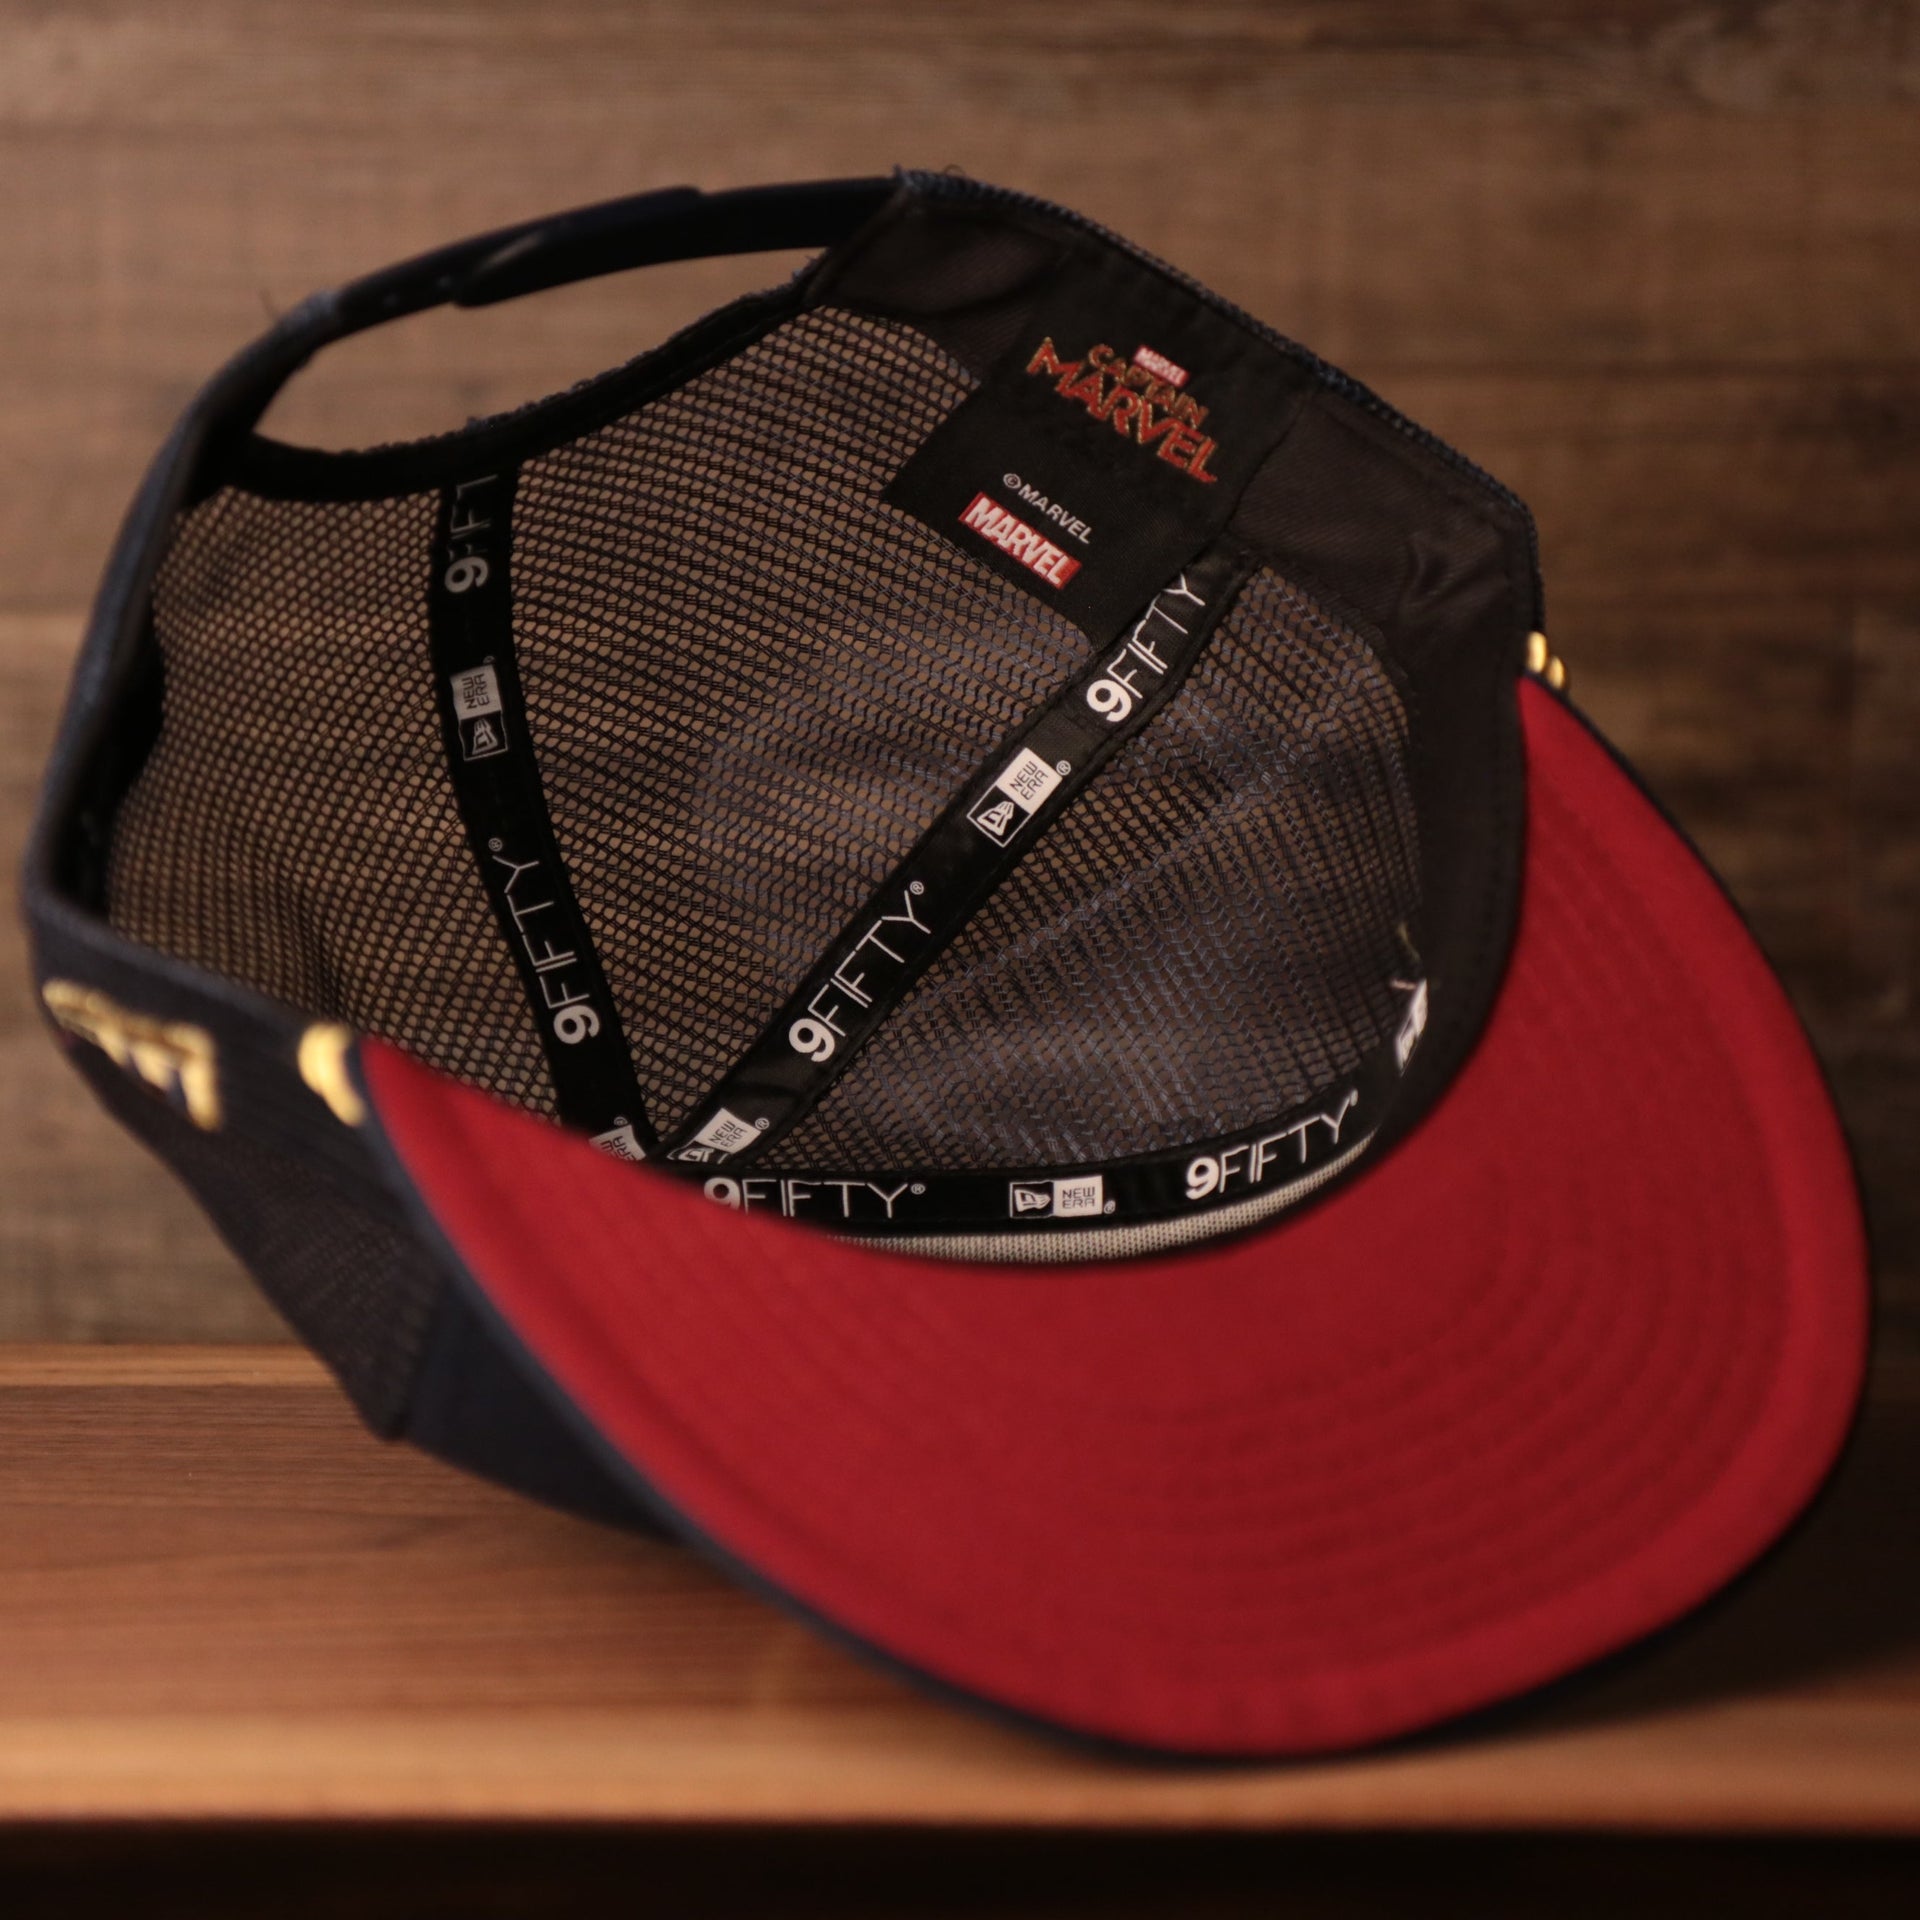 the sweatband on the inside of the snapback is black Captain Marvel Red Bottom Snapback | Captain Marvel Navy Trucker Red Bottom Snap Cap